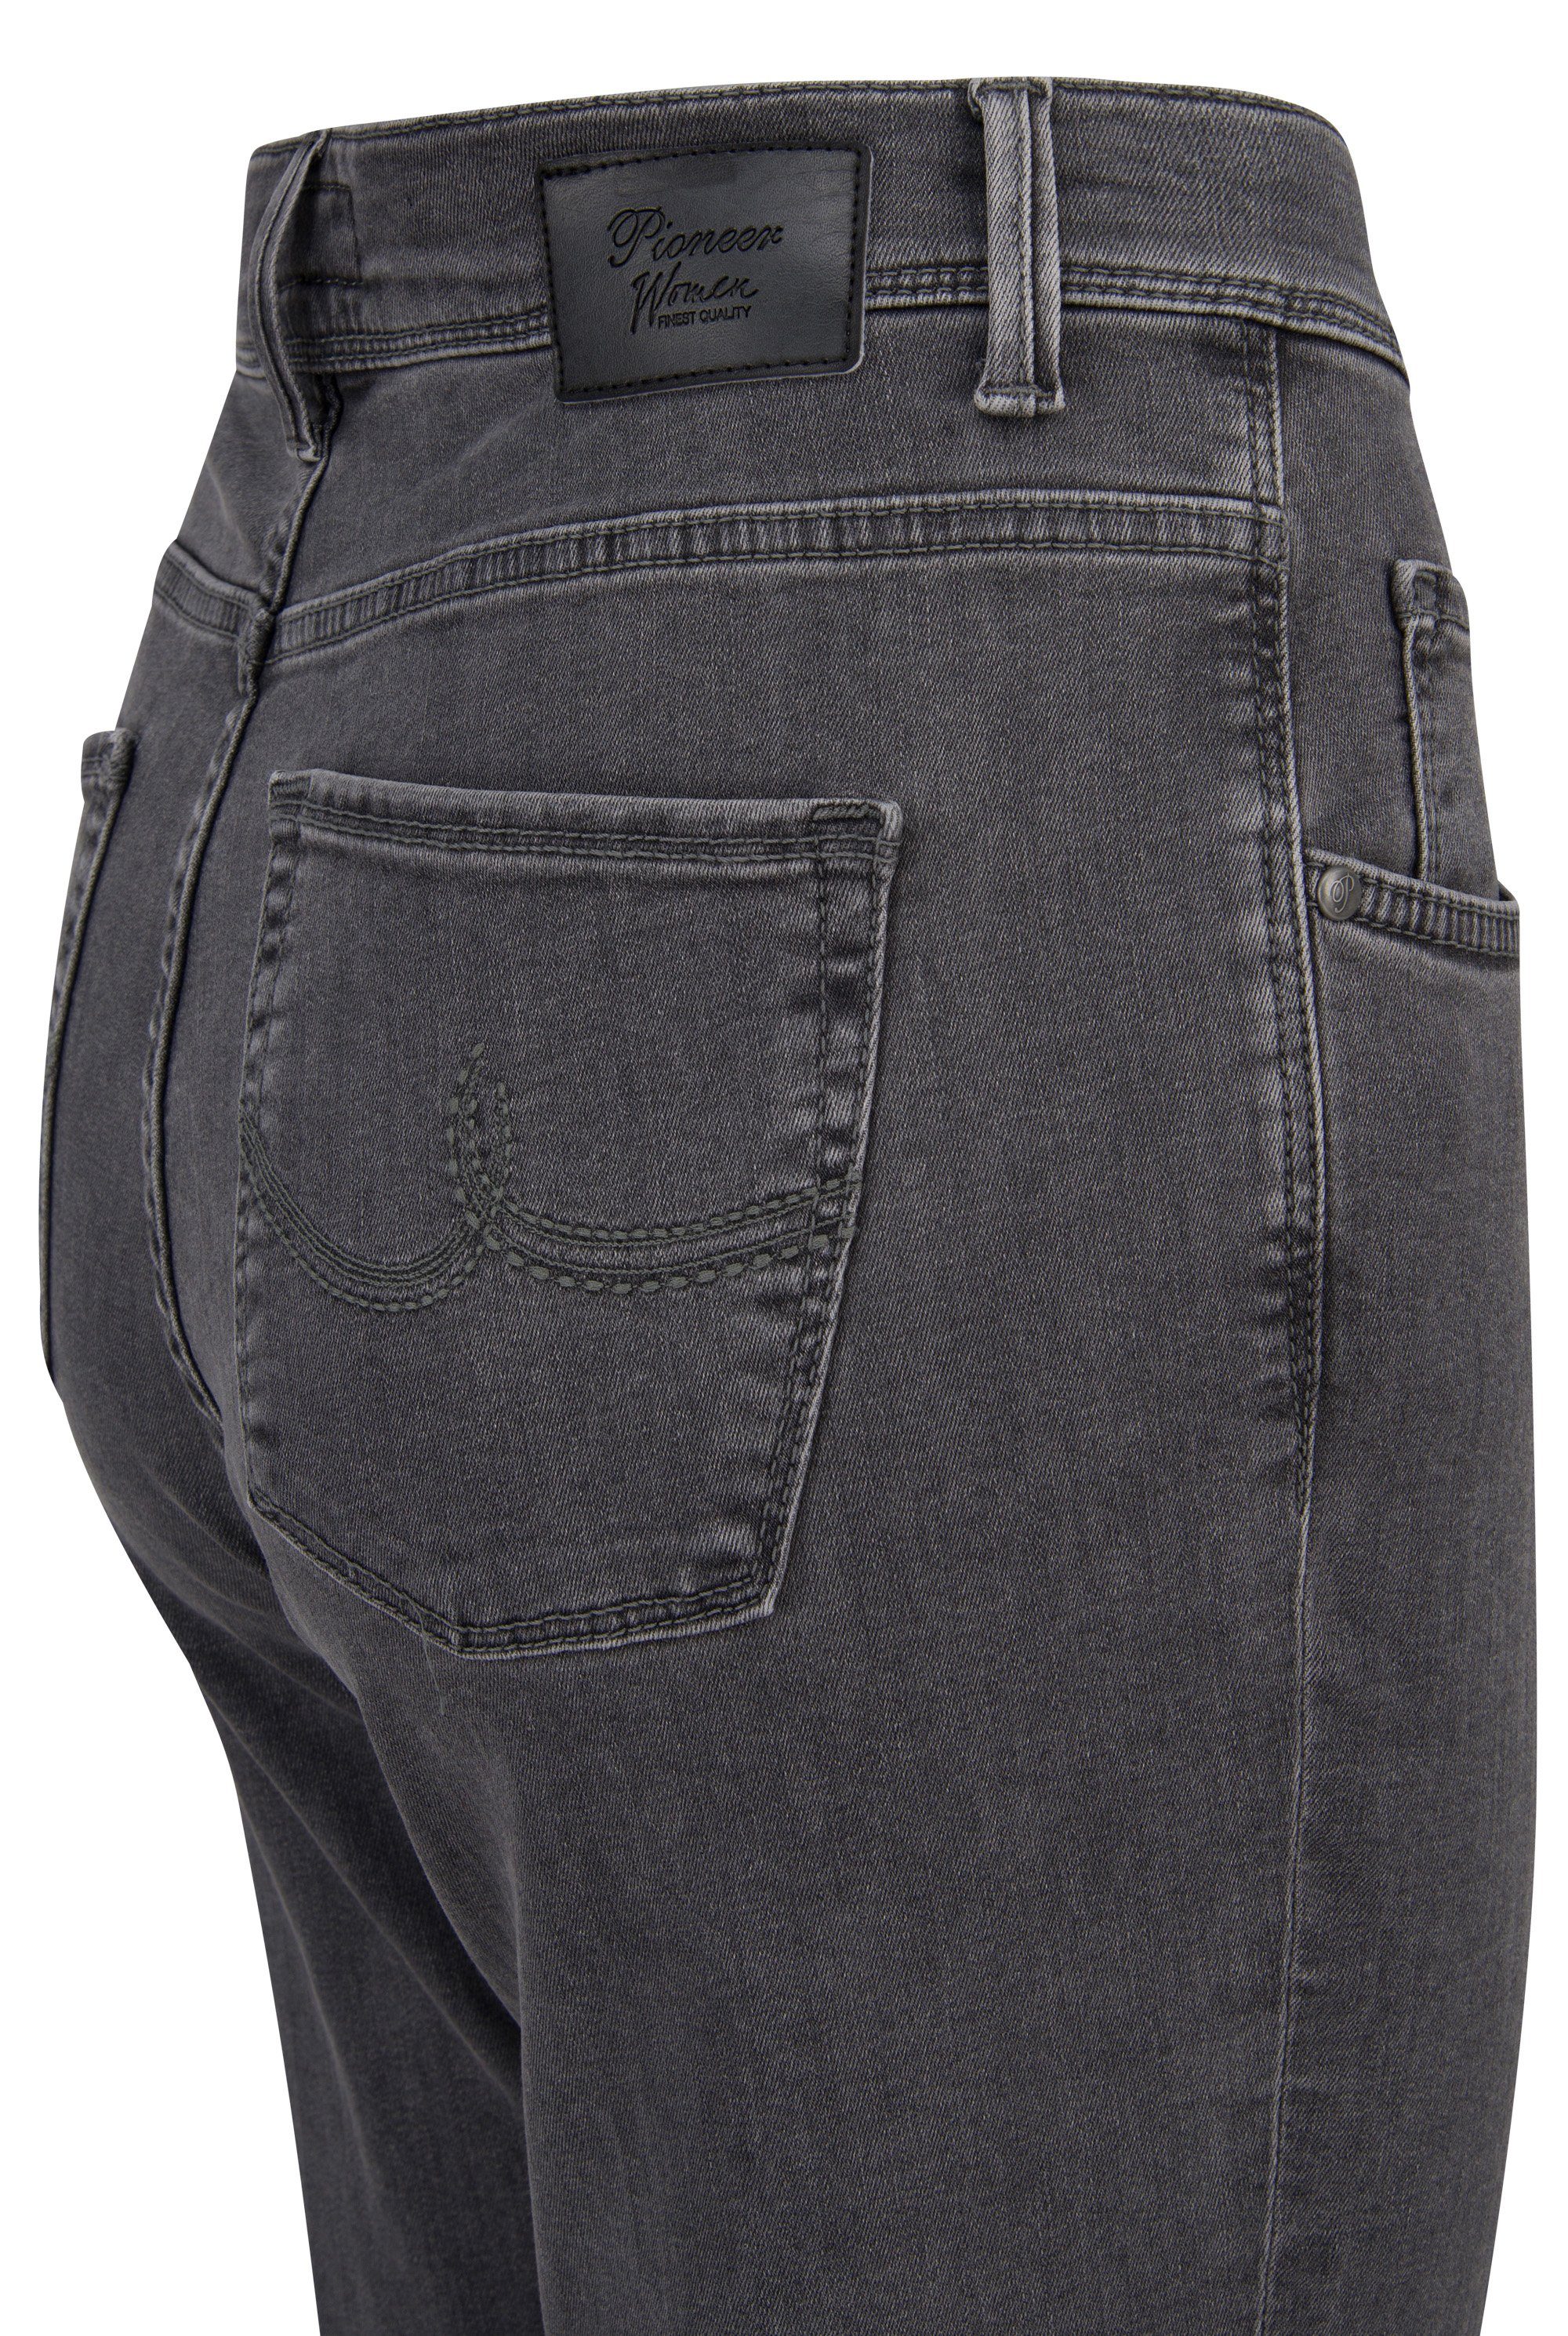 Damen Jeans Pioneer Authentic Jeans Stretch-Jeans PIONEER BETTY grey stonewash 4012 3098.9831 -